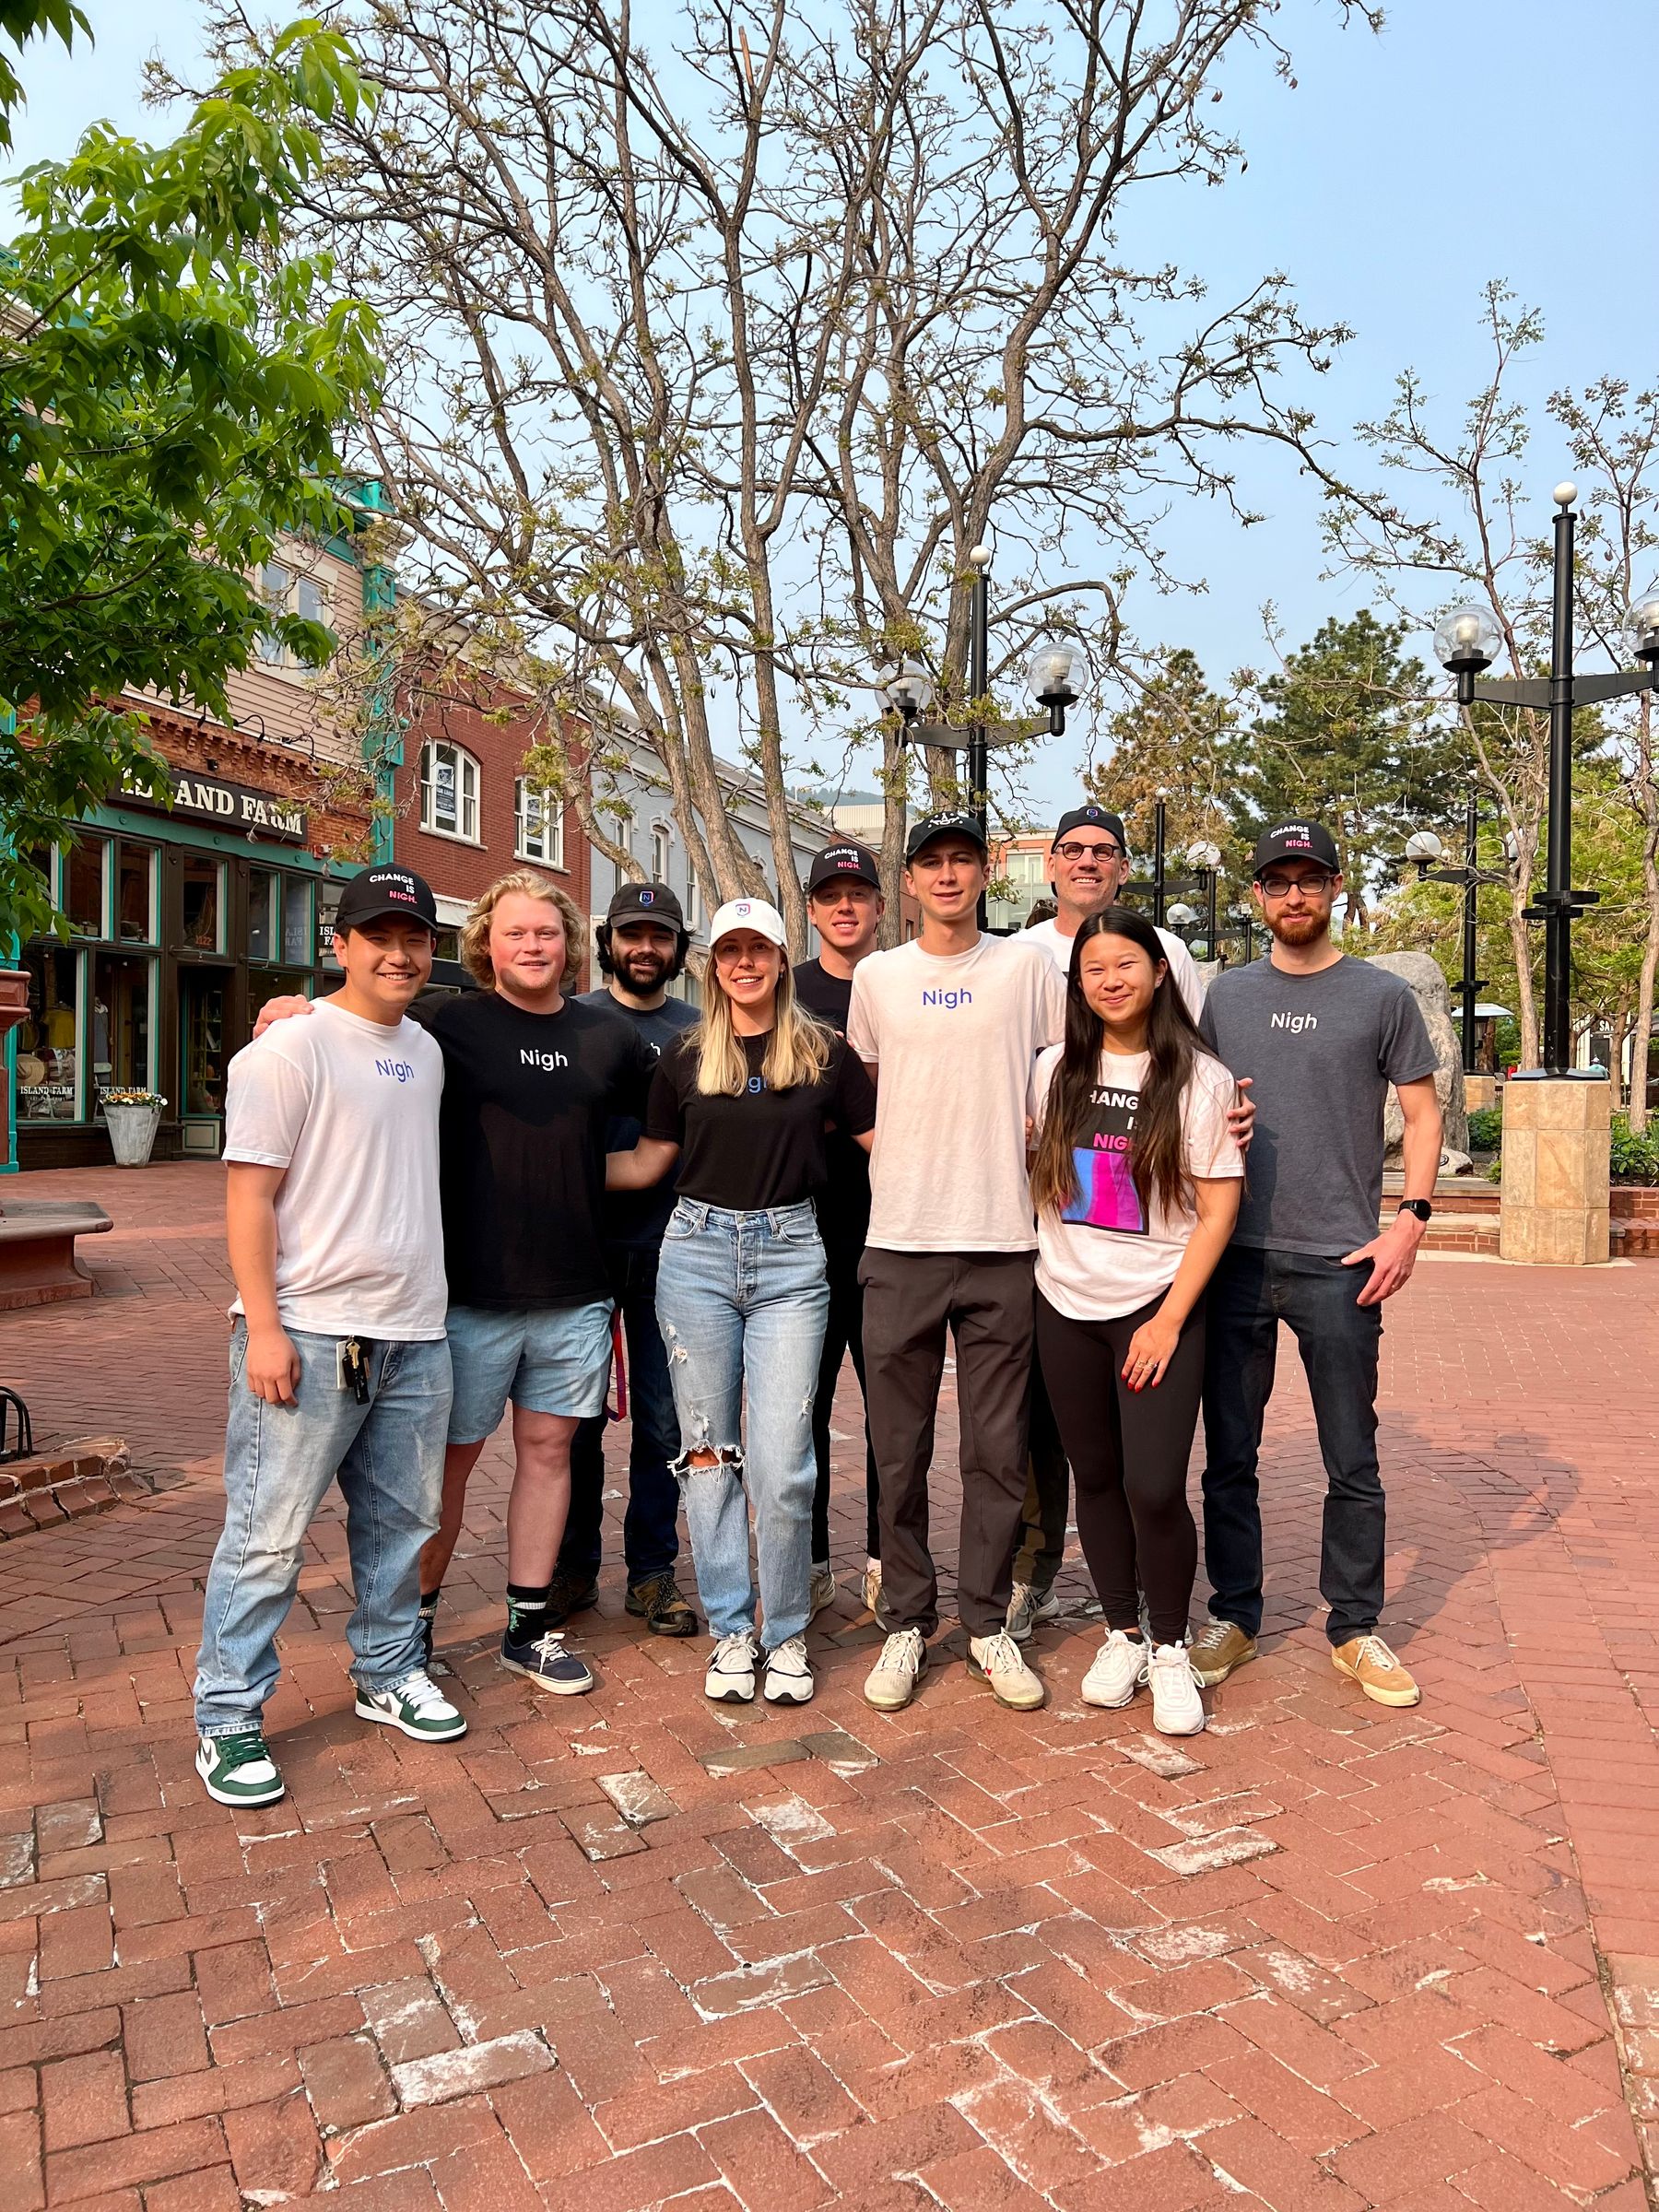 Photo of the Nigh team on Pearl Street